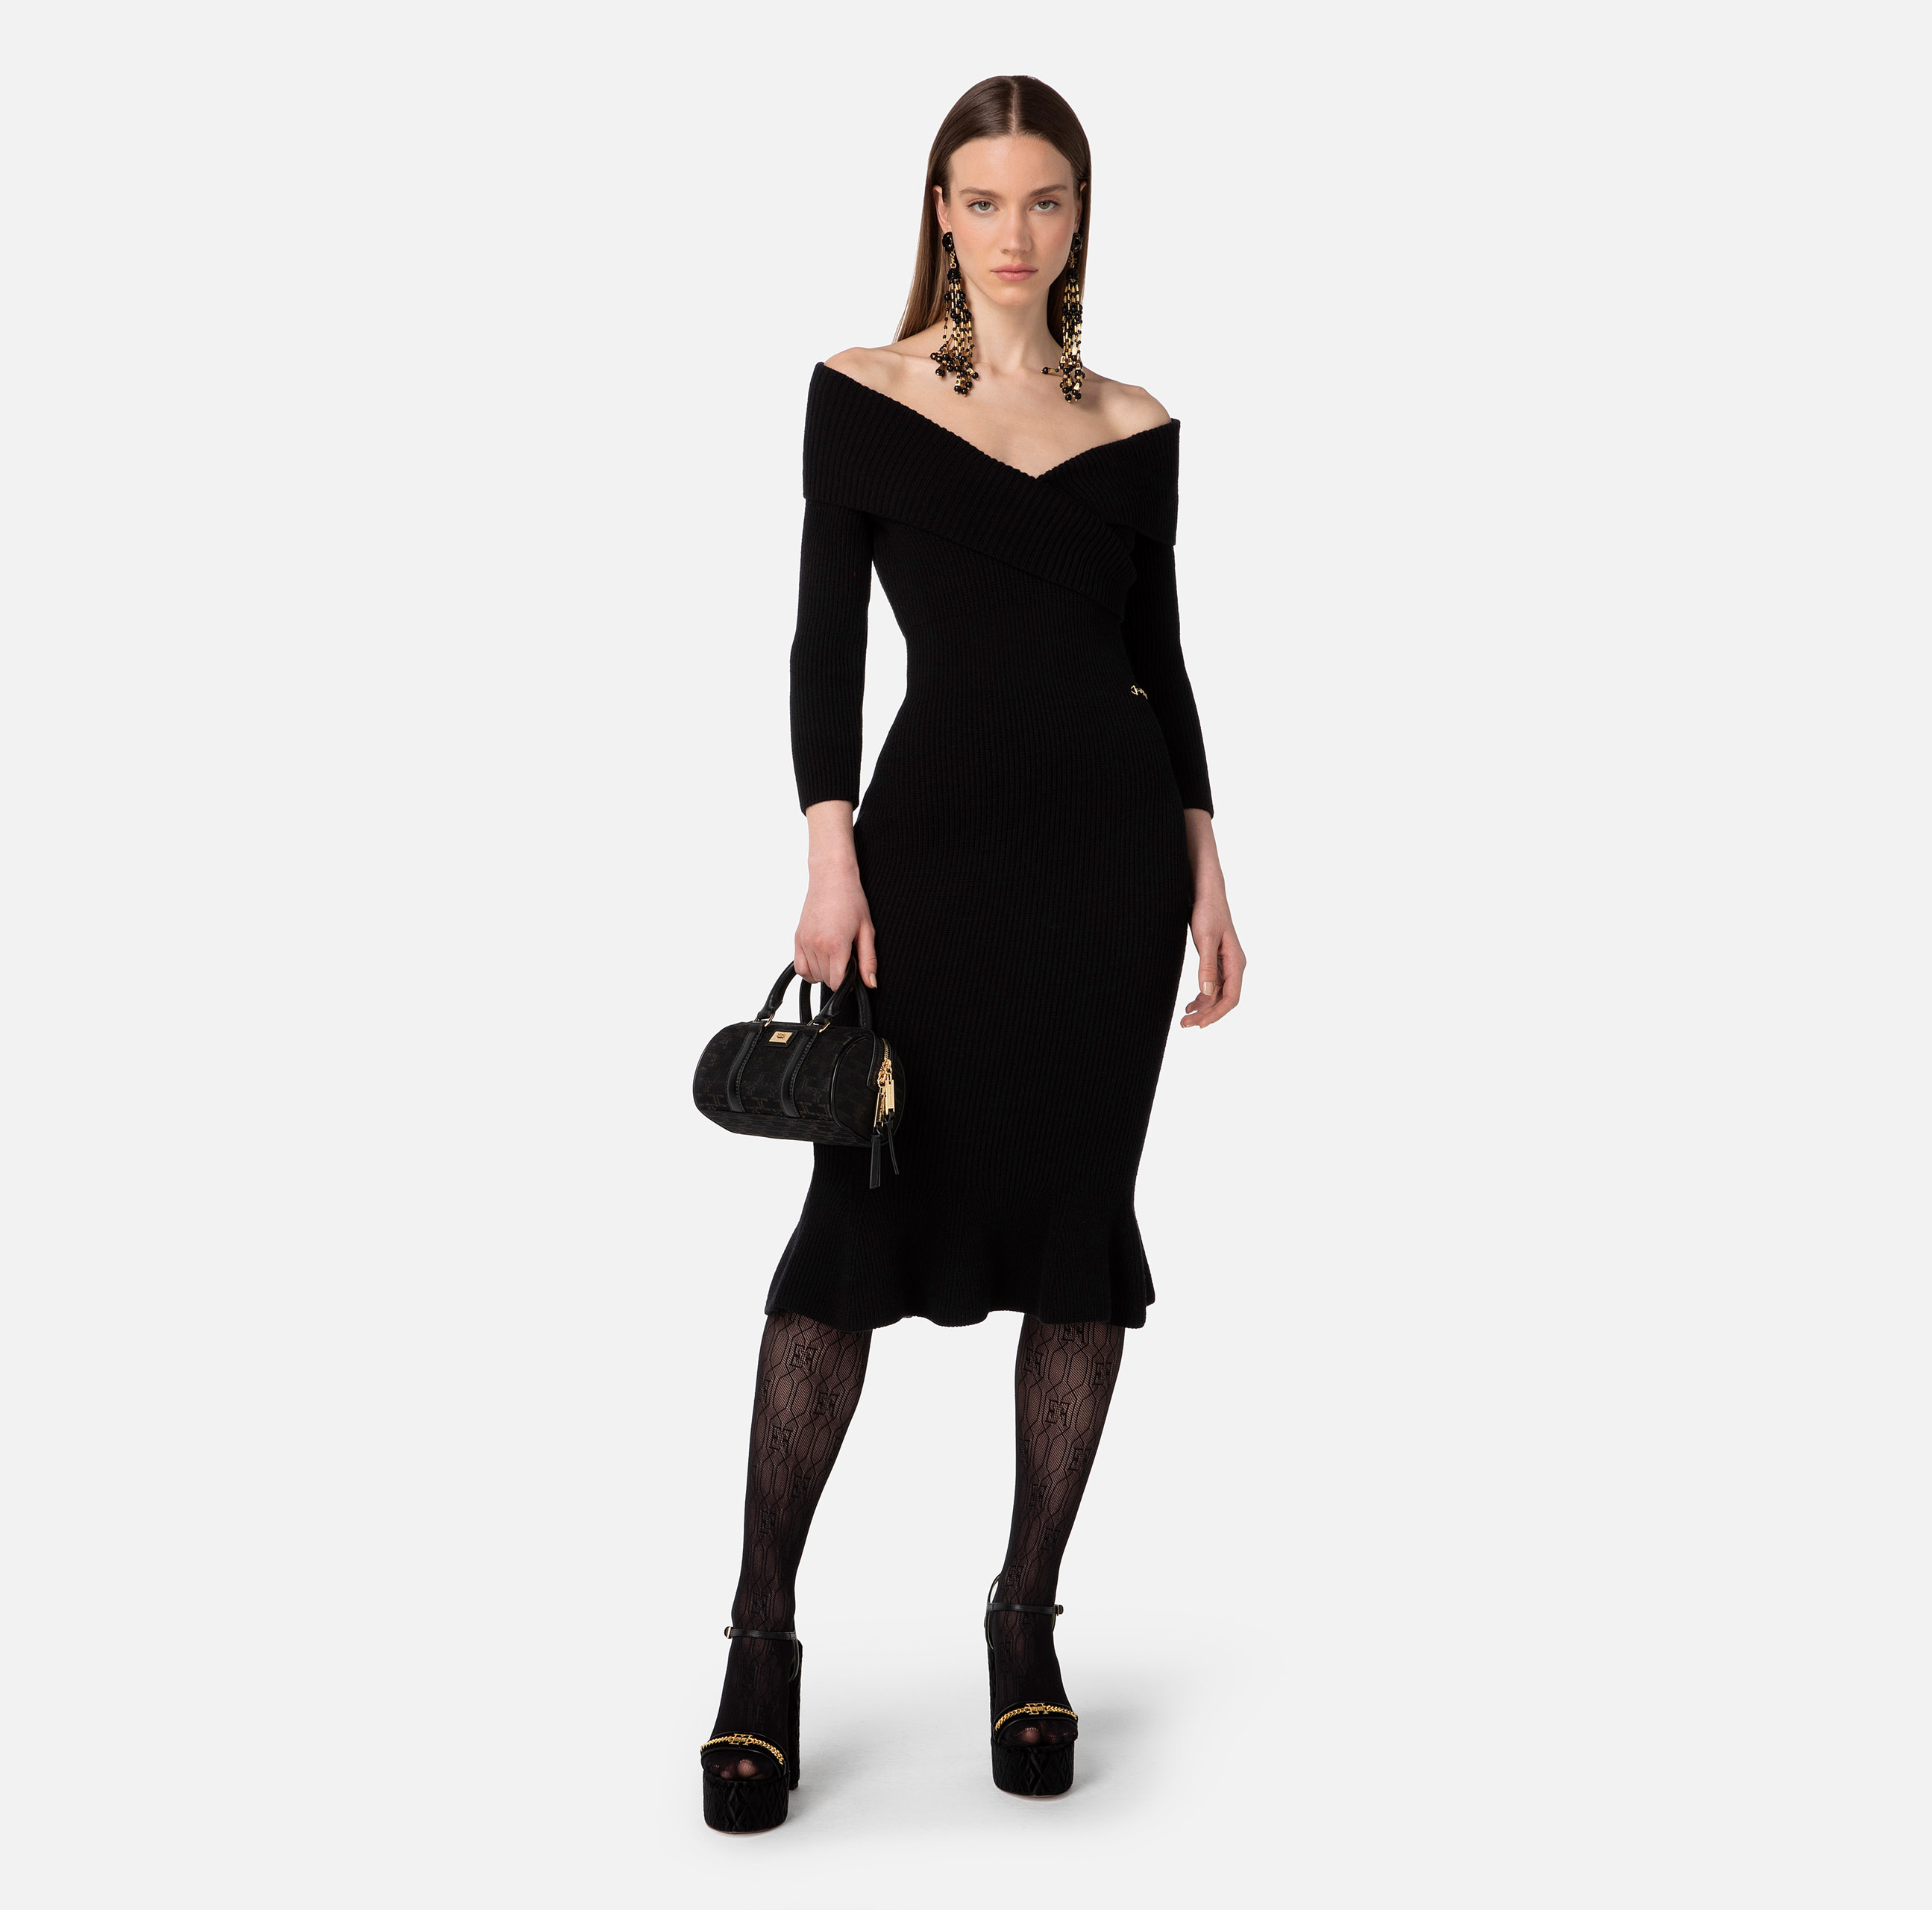 Dress in knit fabric with gored skirt - Elisabetta Franchi